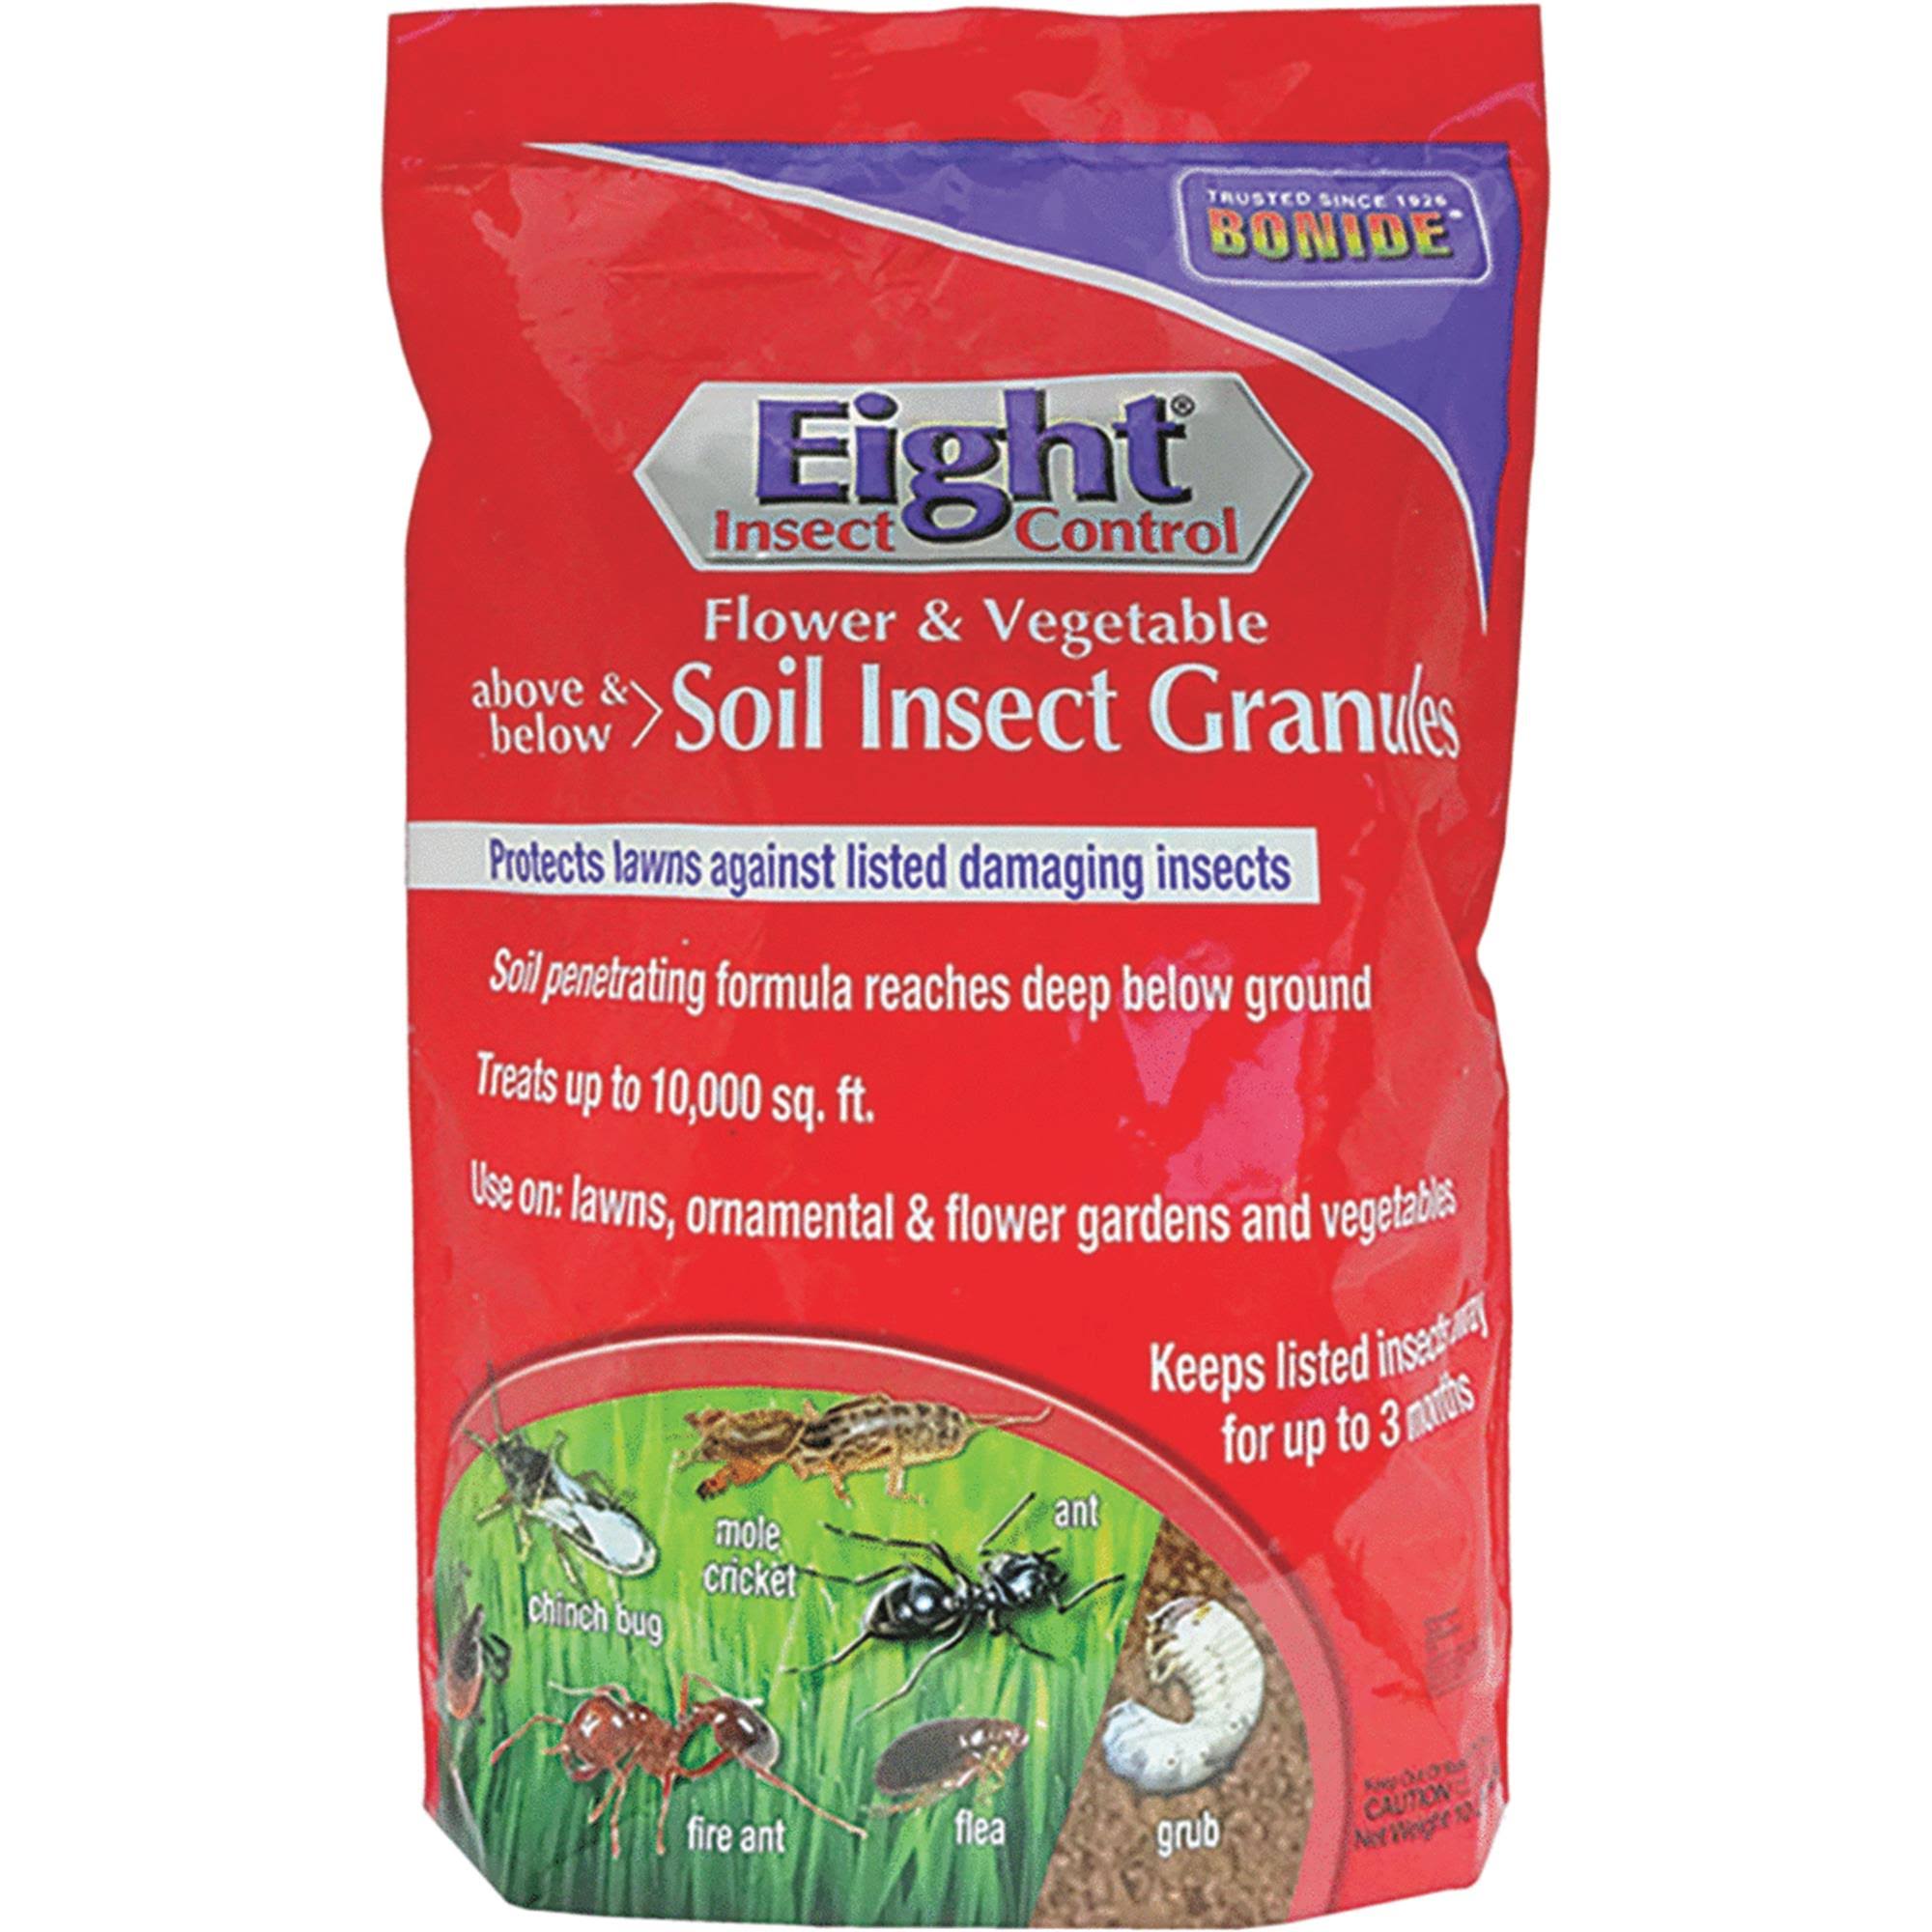 Bonide 791 10lbs Eight Insect Granules